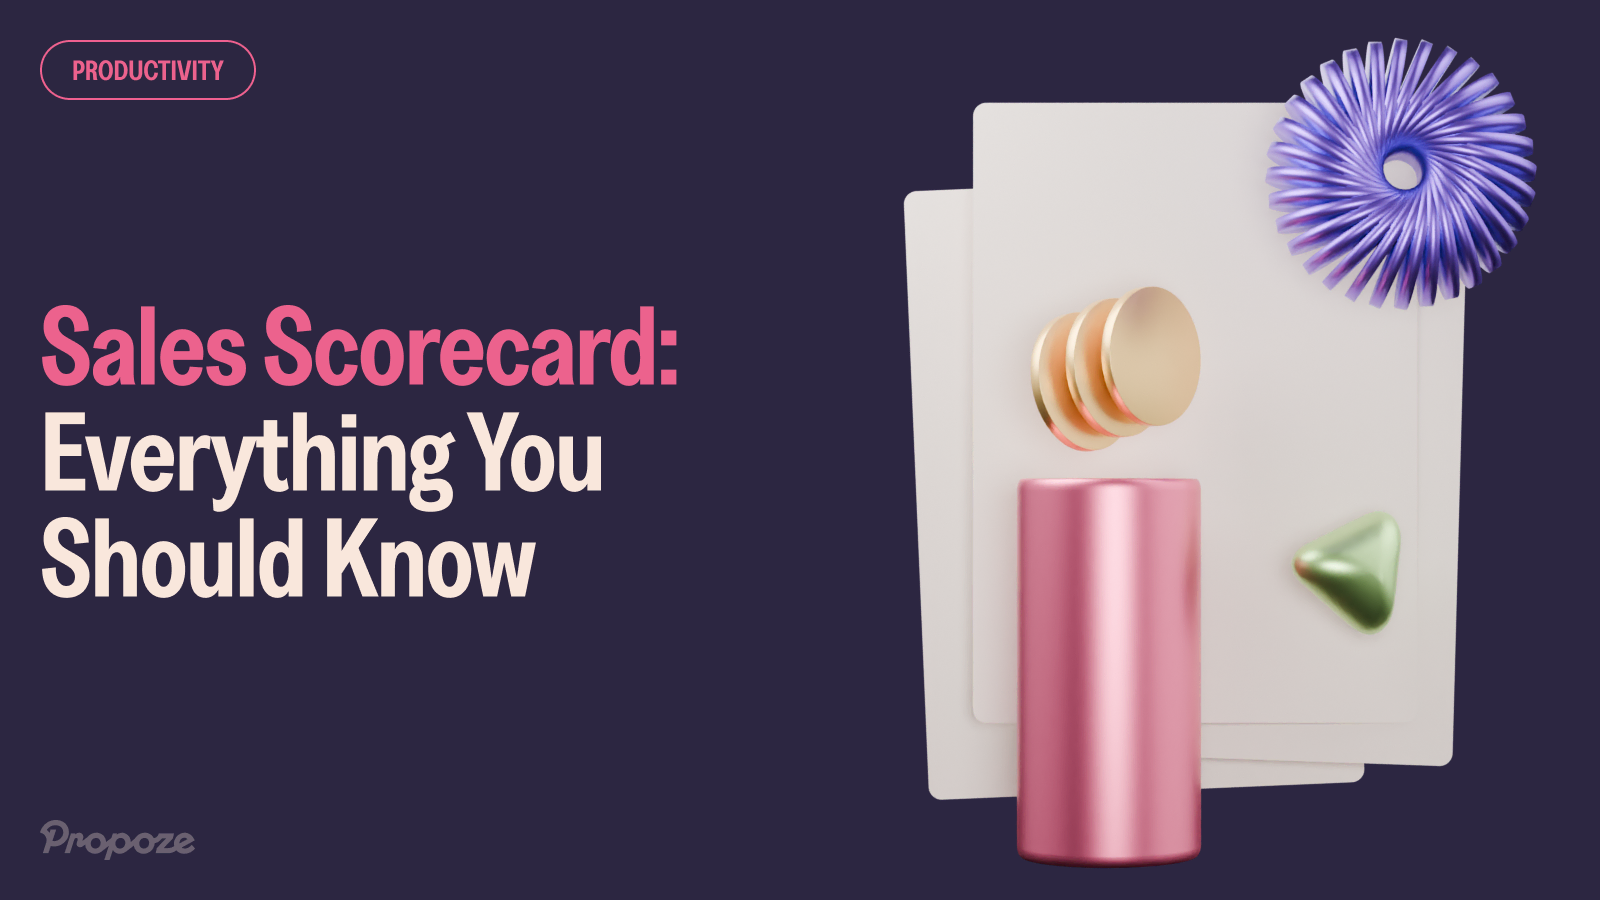 Sales Scorecard: Everything You Should Know